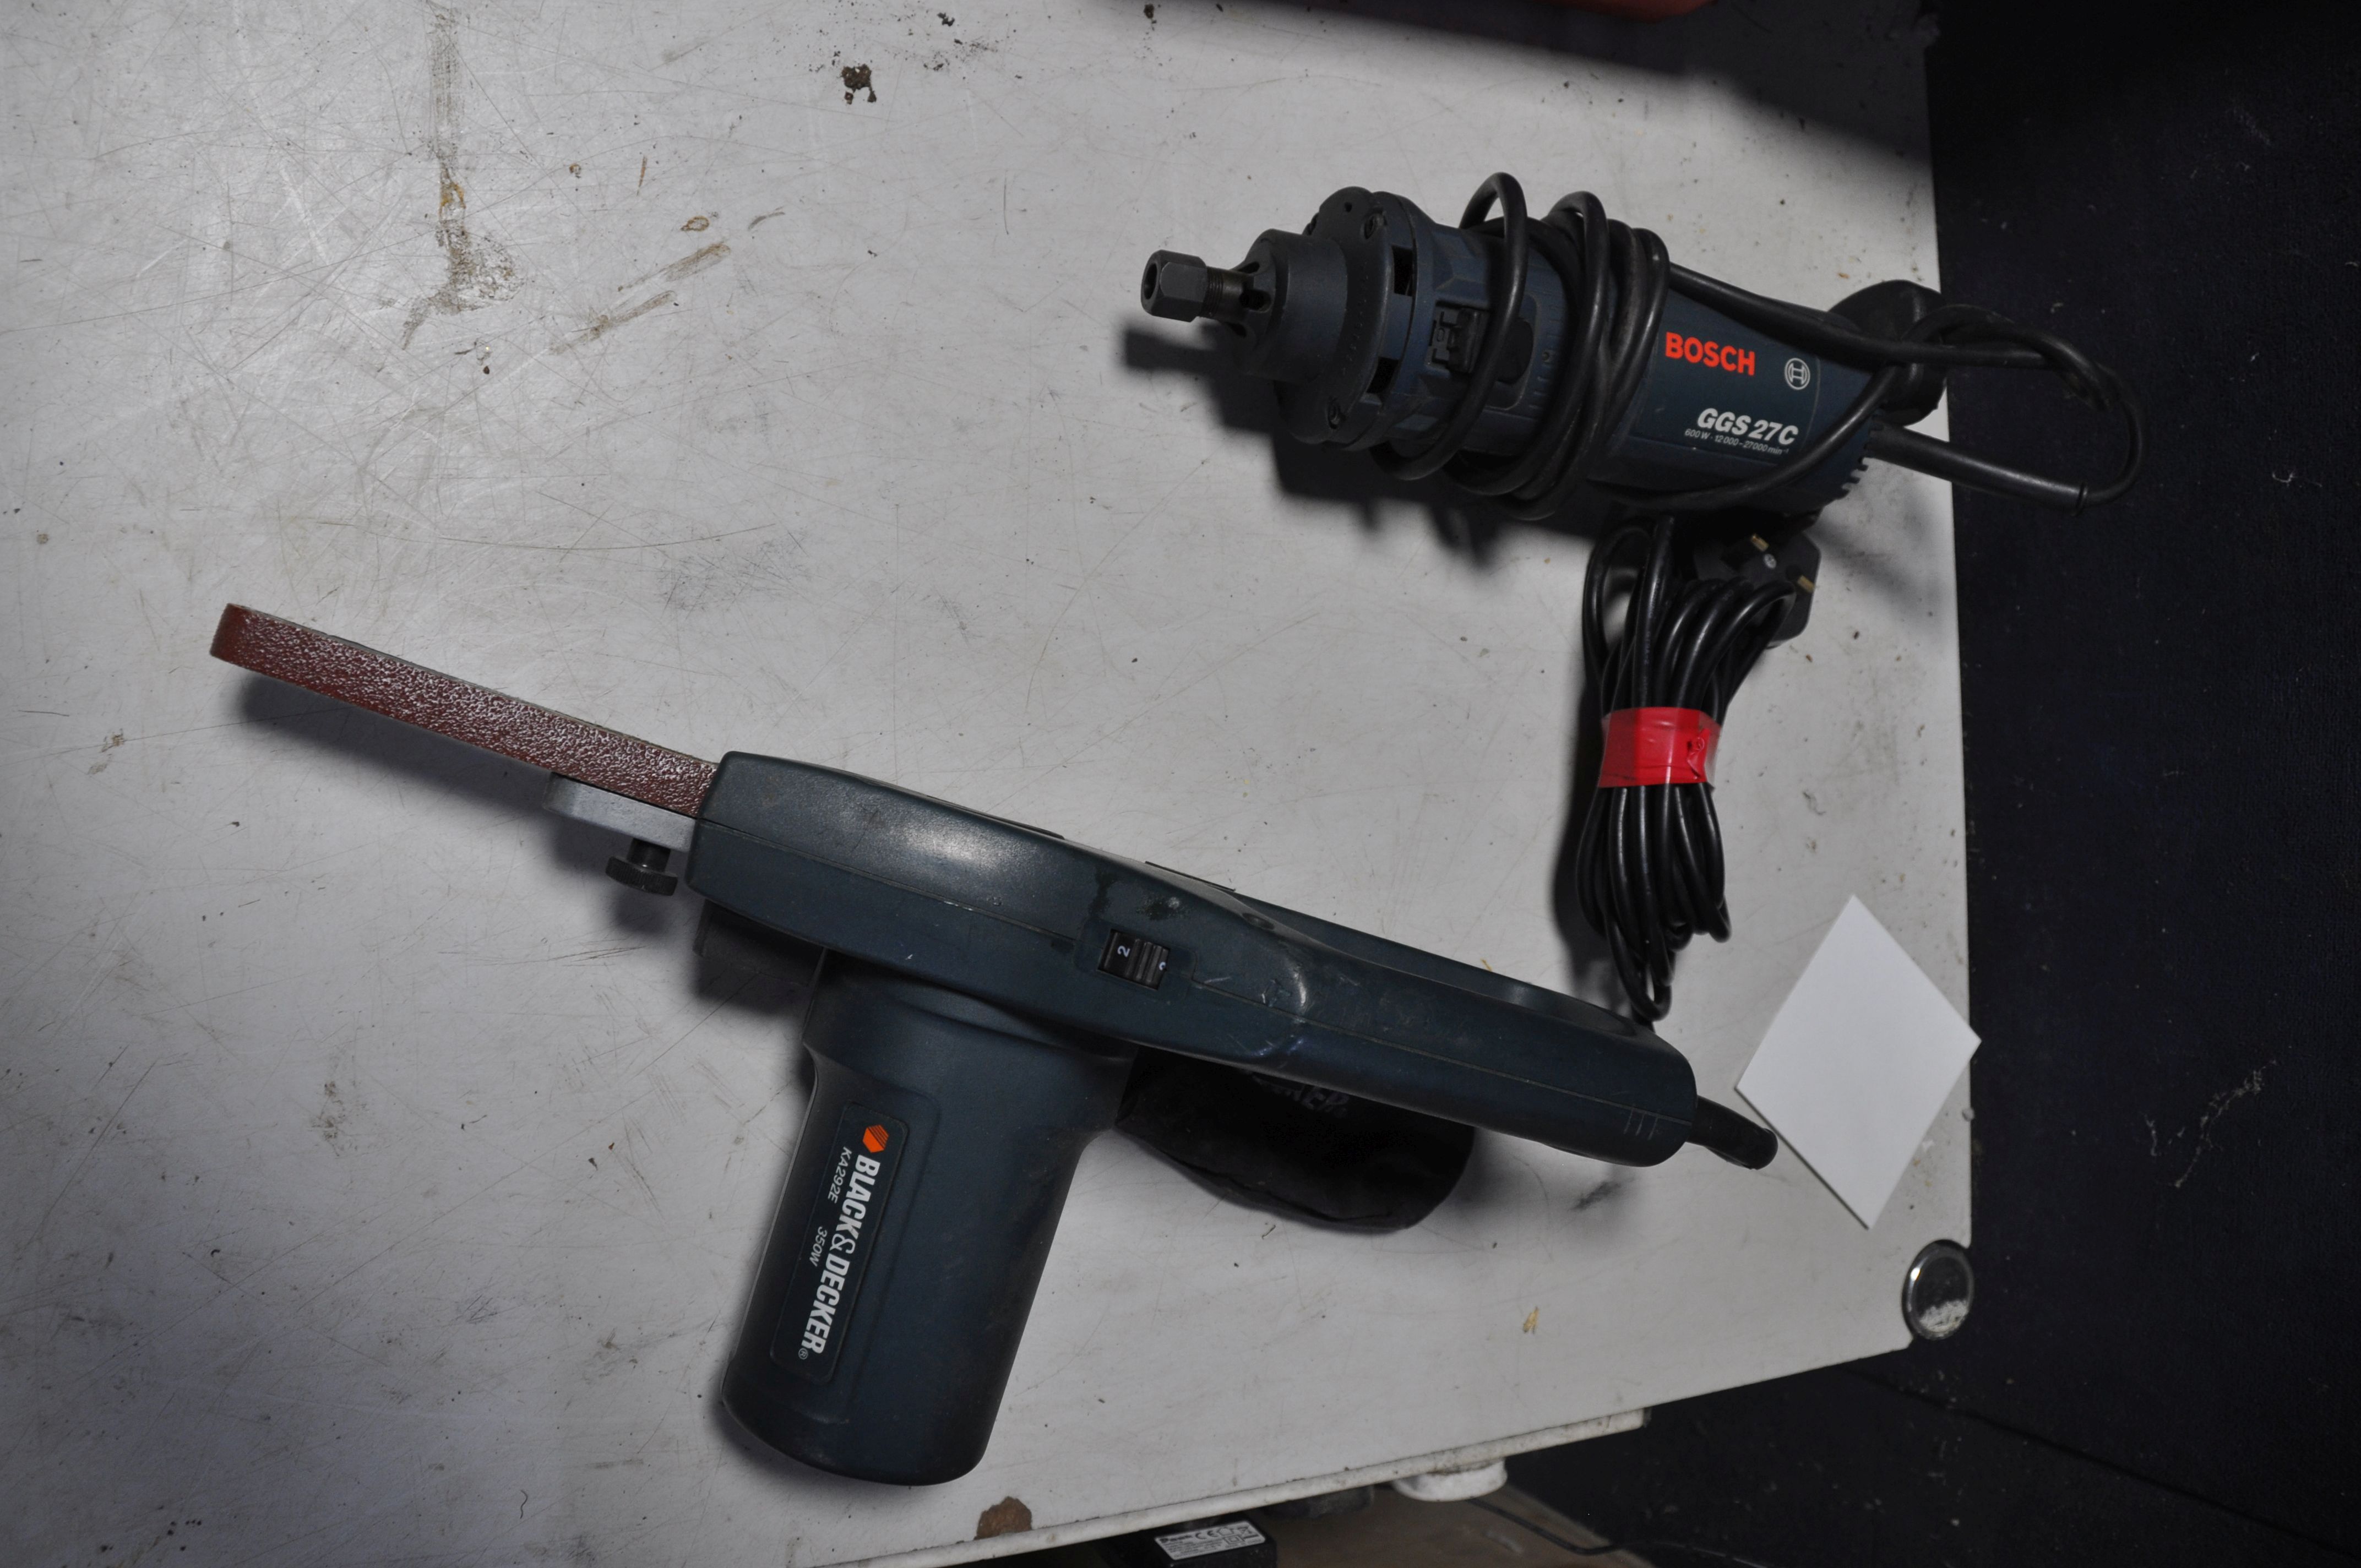 A METABO SBE750 DRILL in original case with 110v plug along with a Bosch CSB 700-2RE drill in - Image 3 of 3